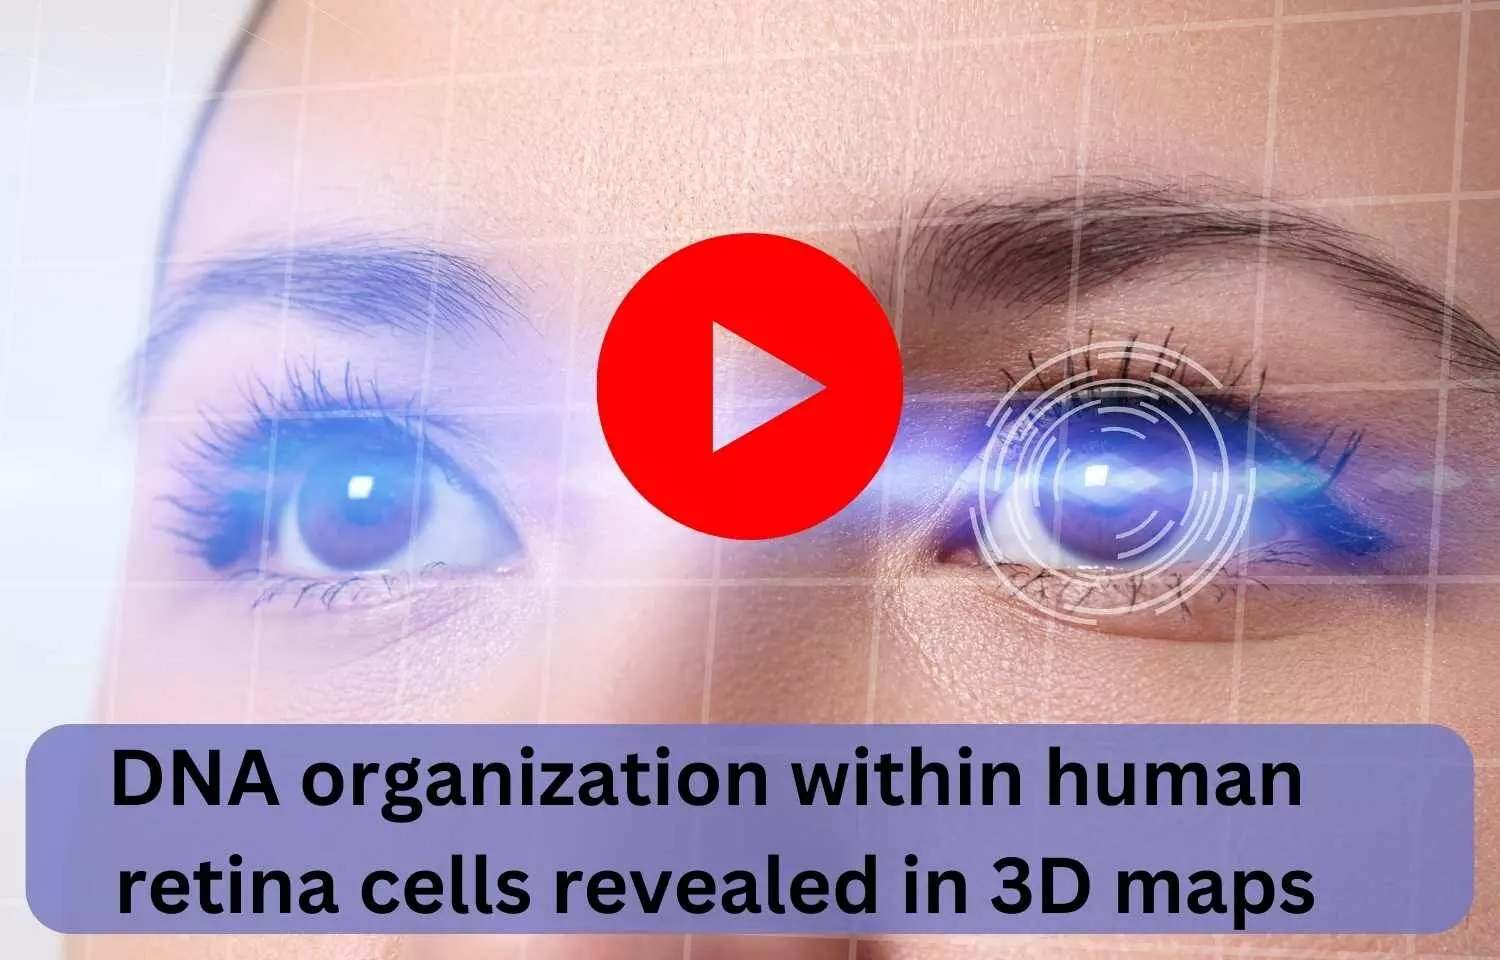 DNA organization within human retina cells revealed in 3D maps